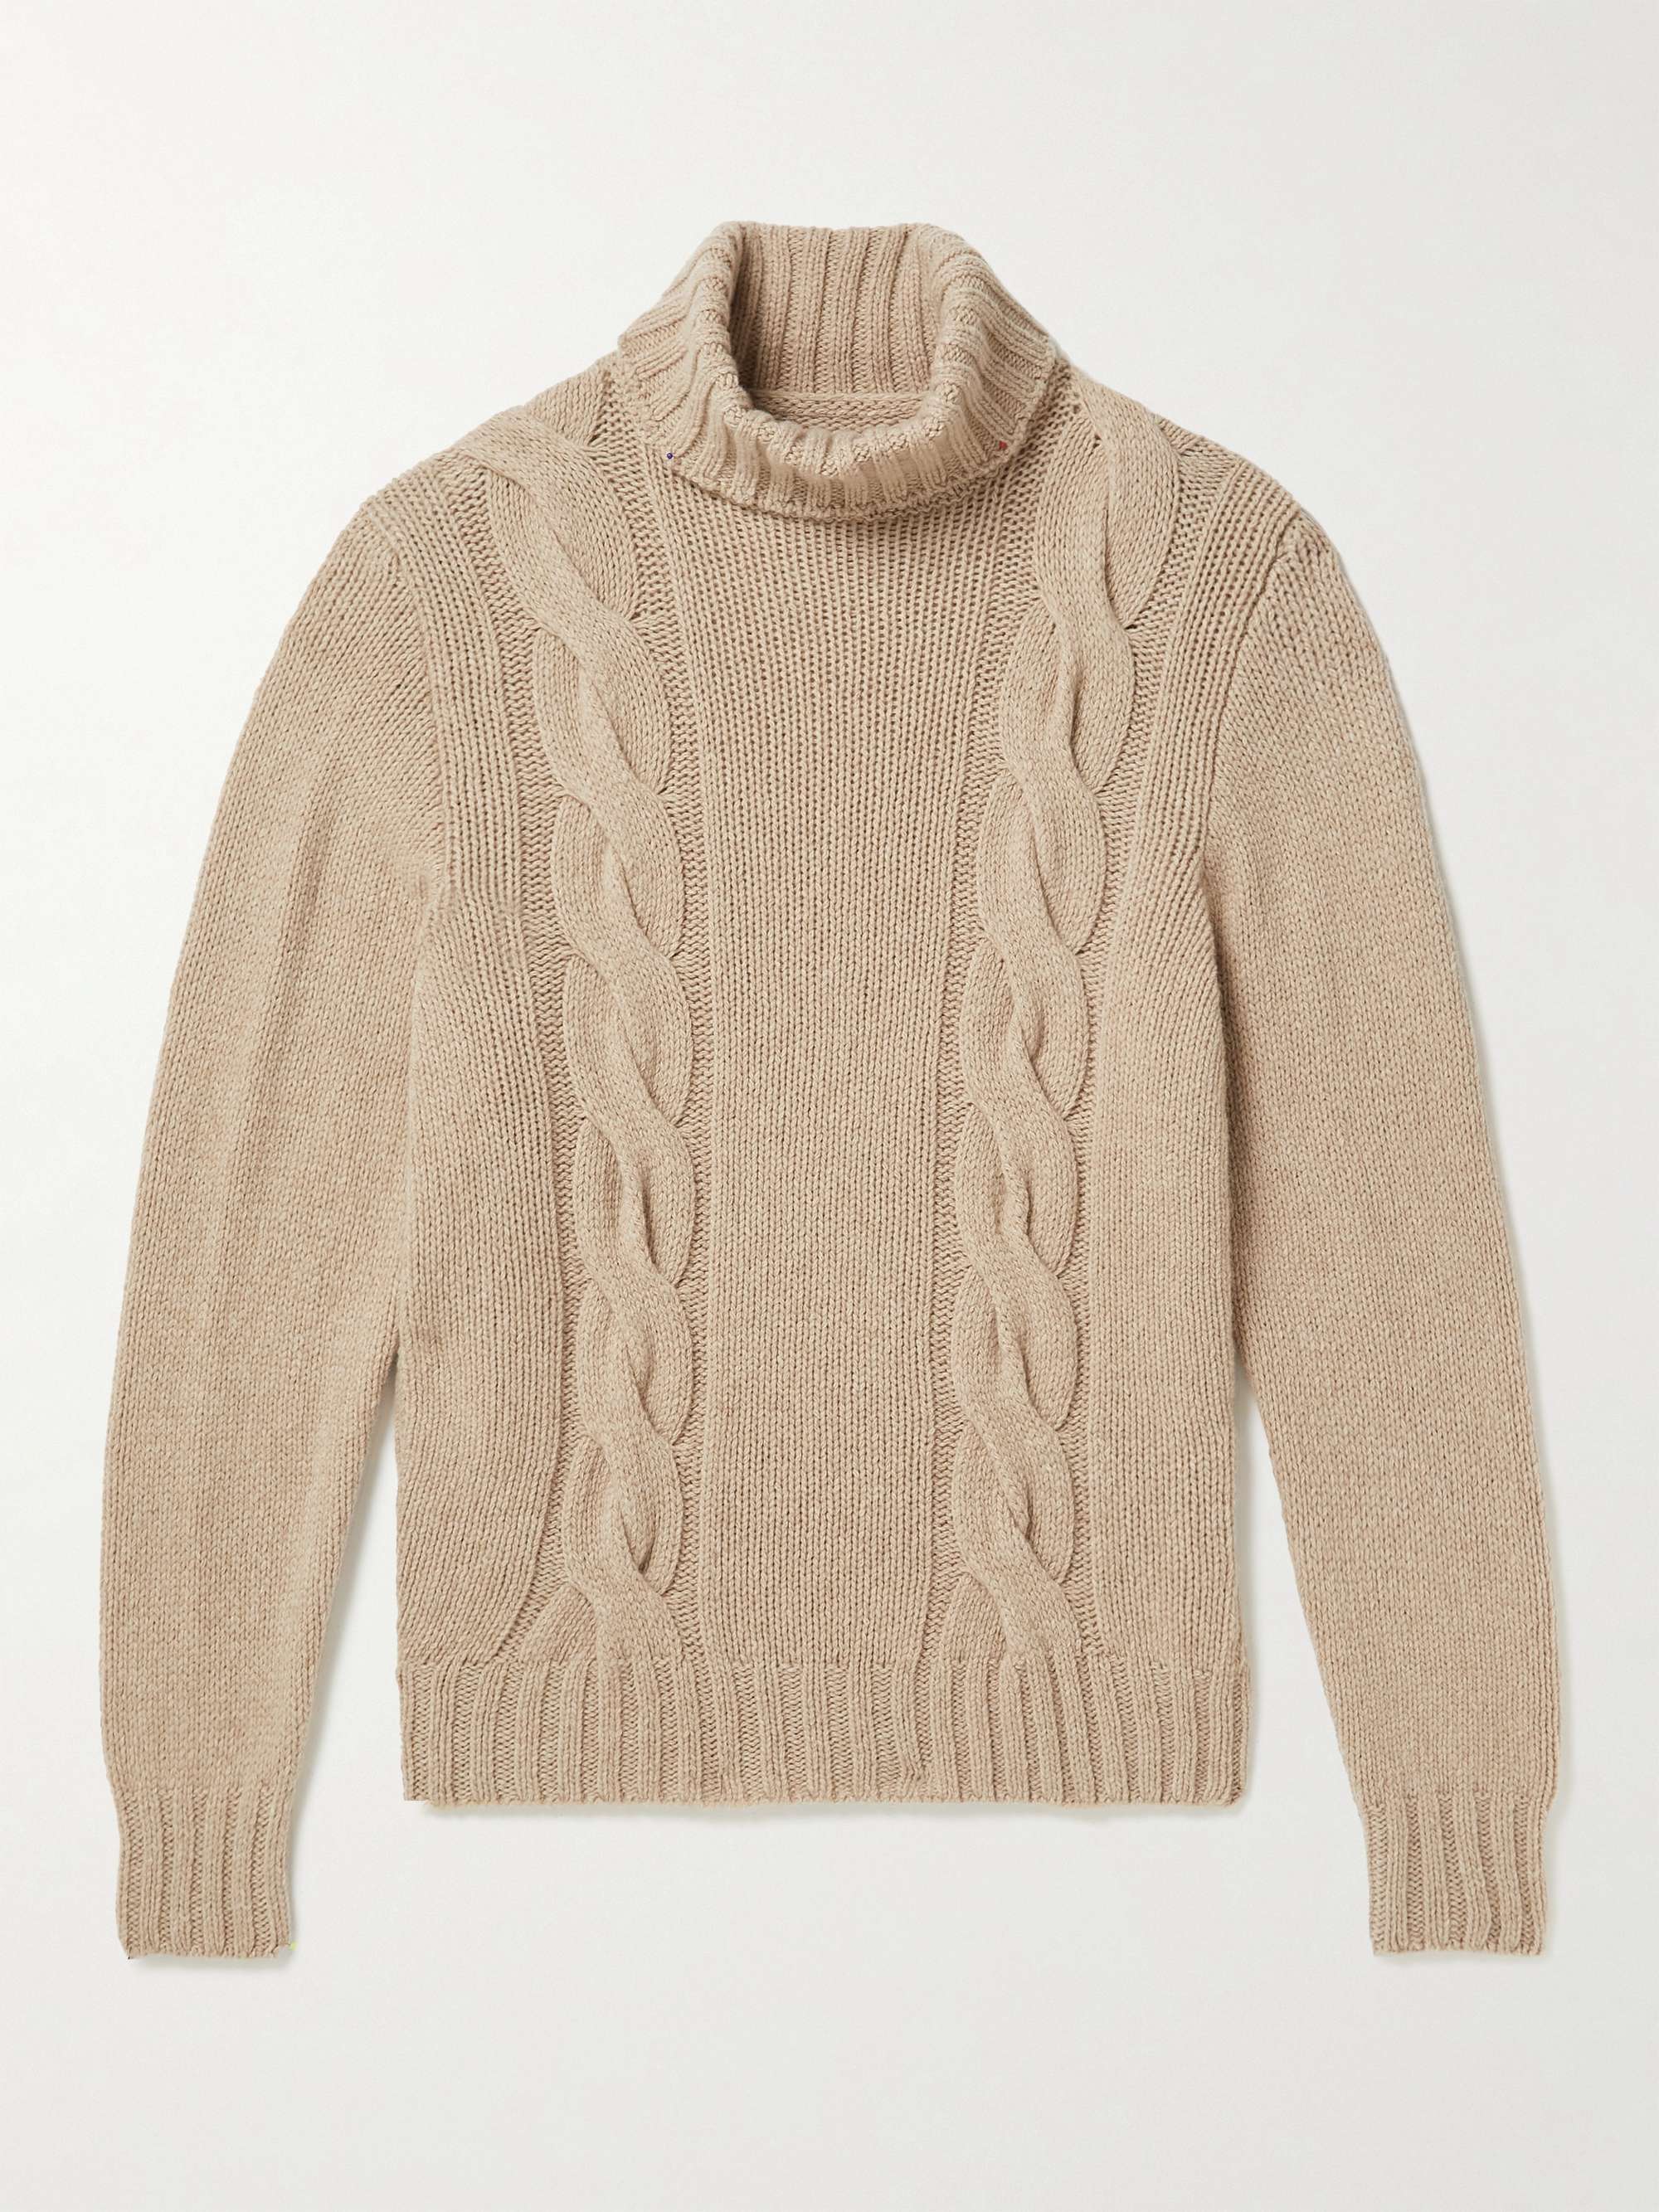 ANDERSON & SHEPPARD Cable-Knit Merino Wool Rollneck Sweater